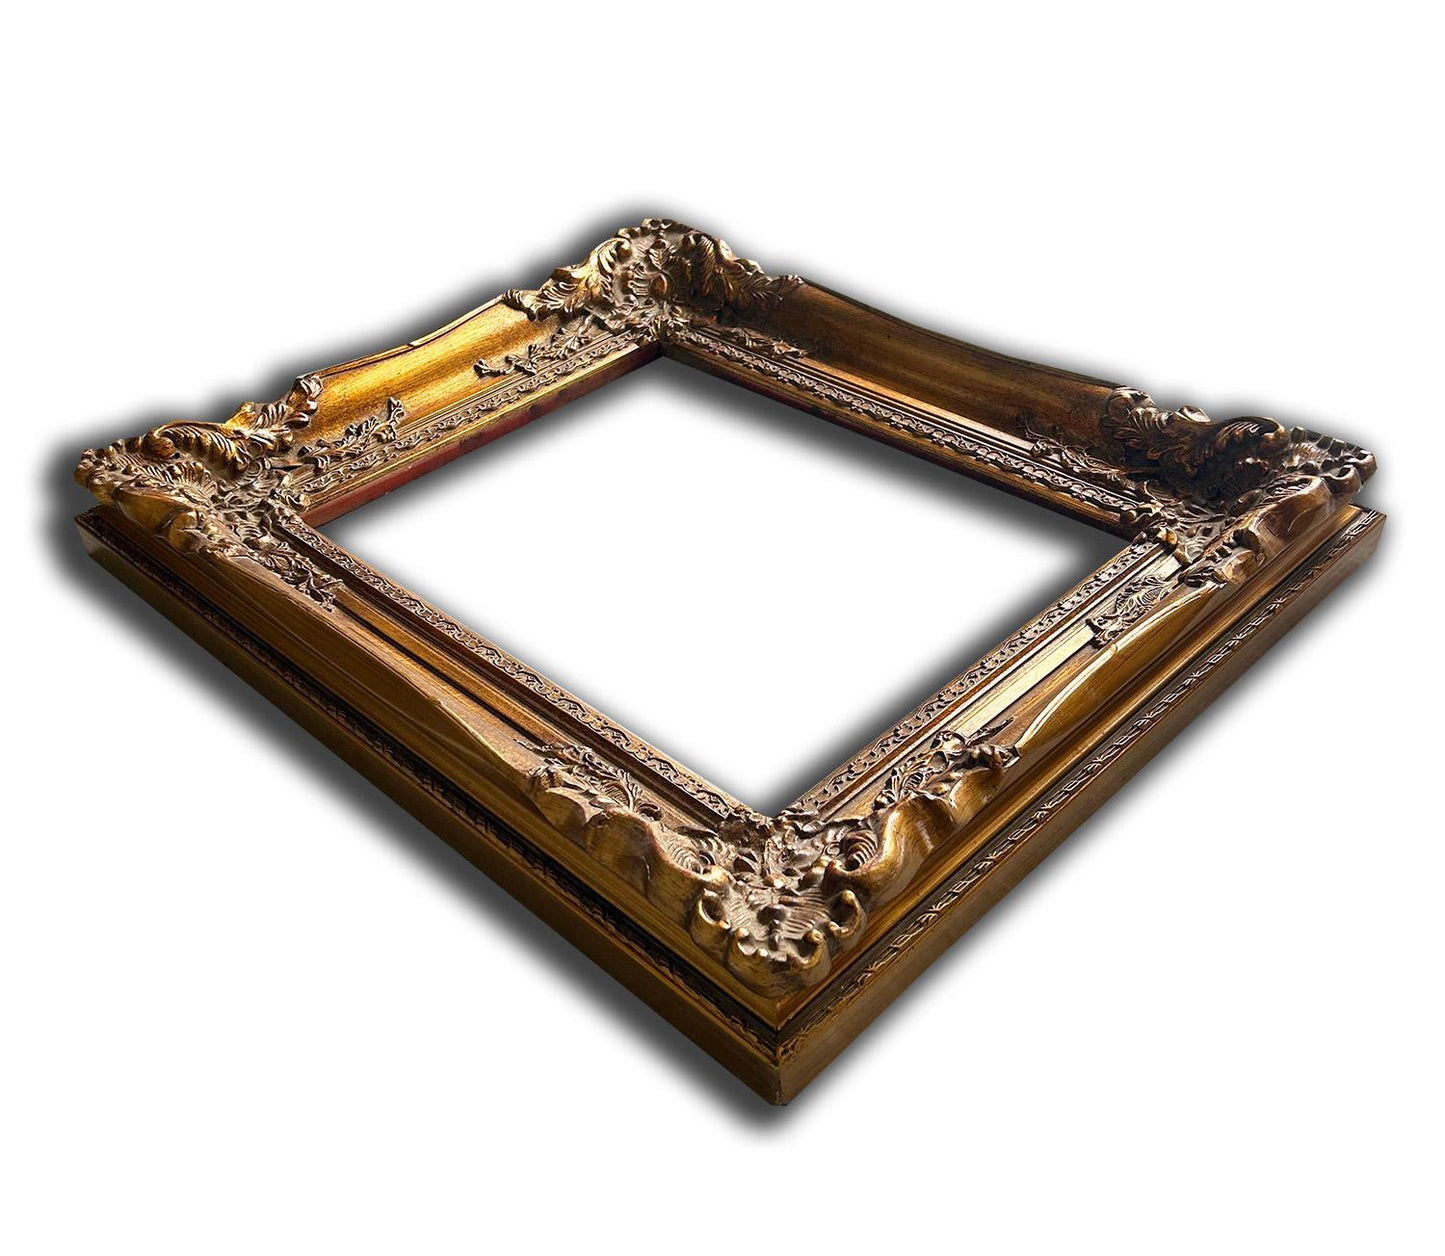 39x47 cm or 16x19 ins, wooden photo frame